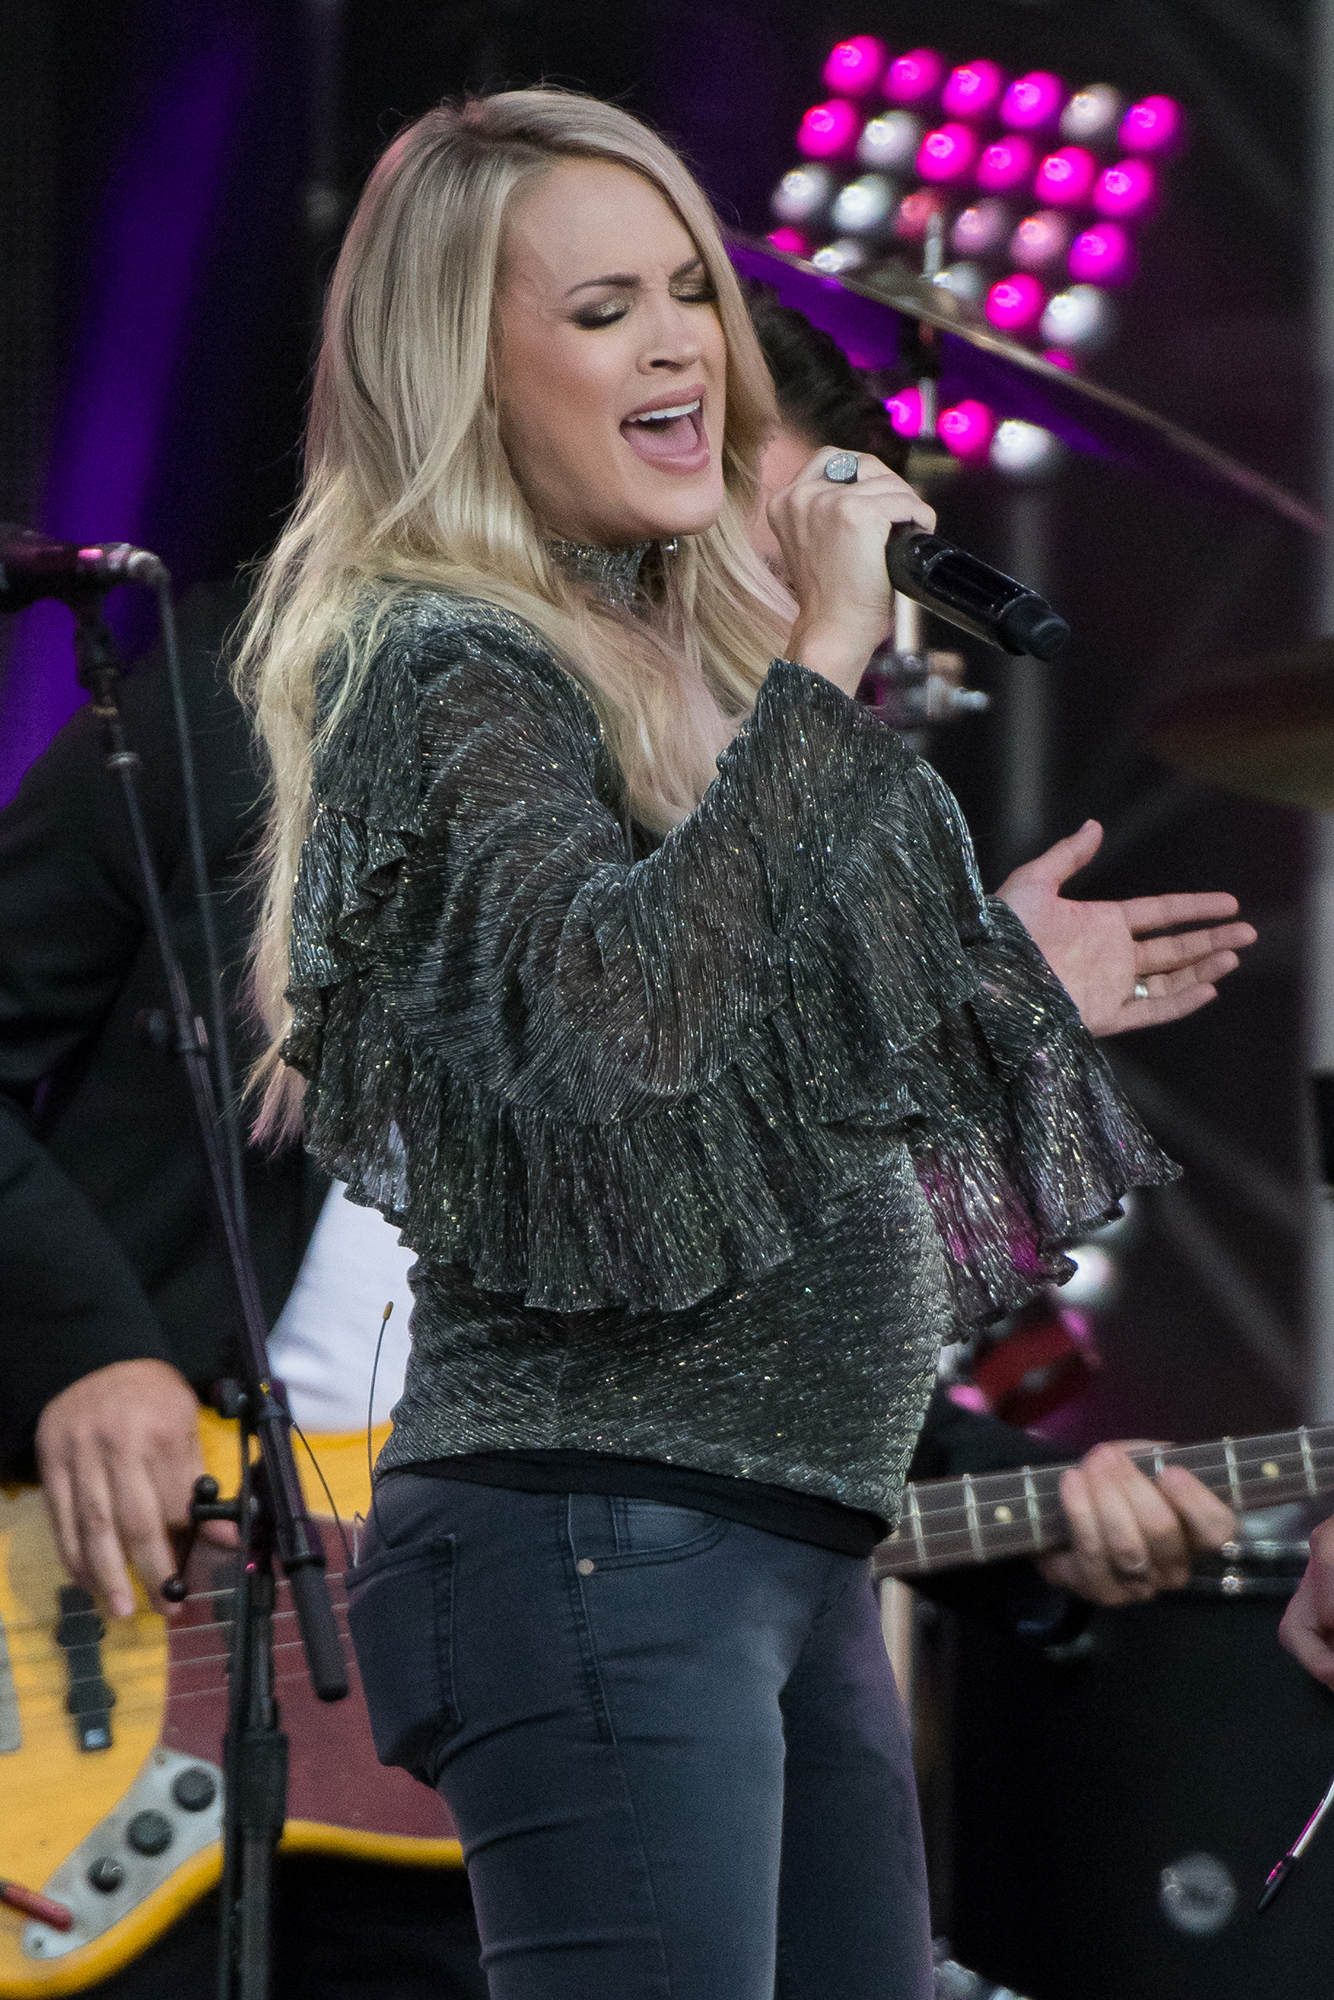 Carrie Underwood's sparkling pregnancy style